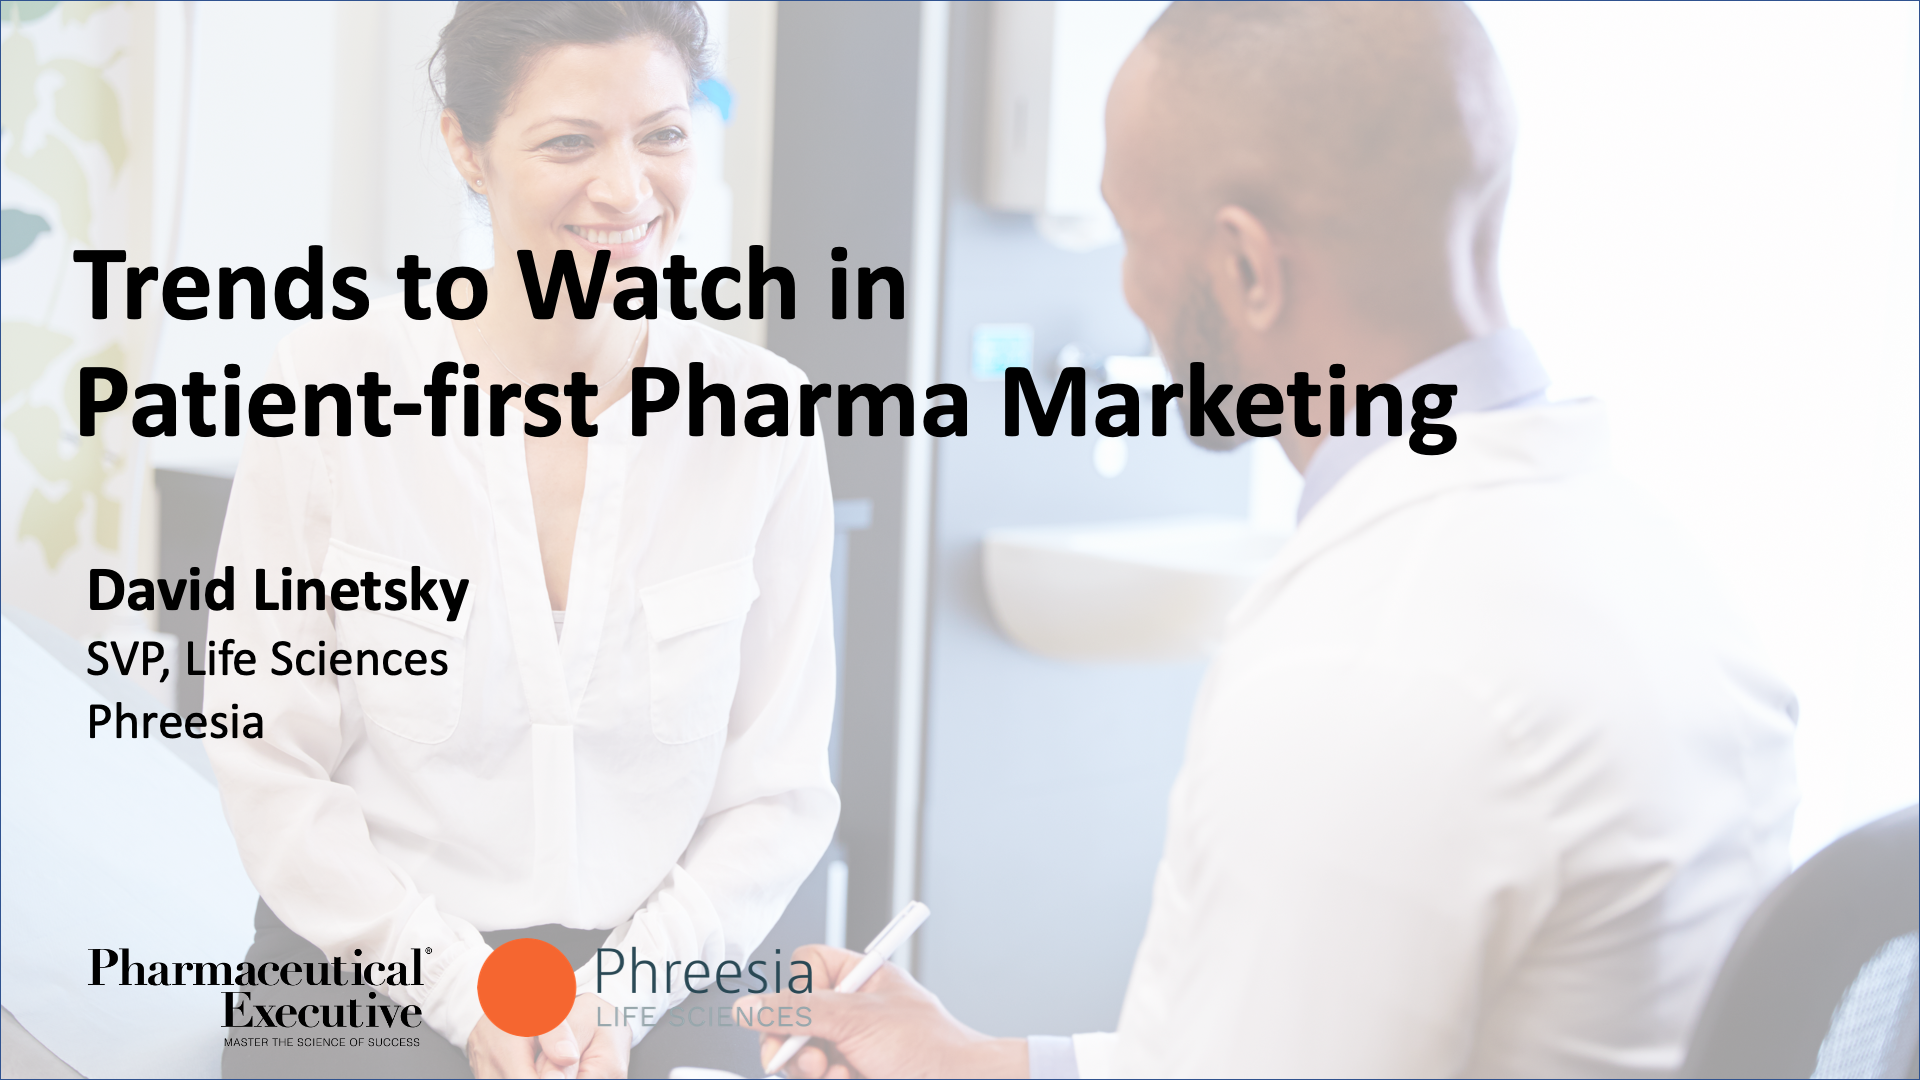 Trends to Watch in Patient-first Pharma Marketing